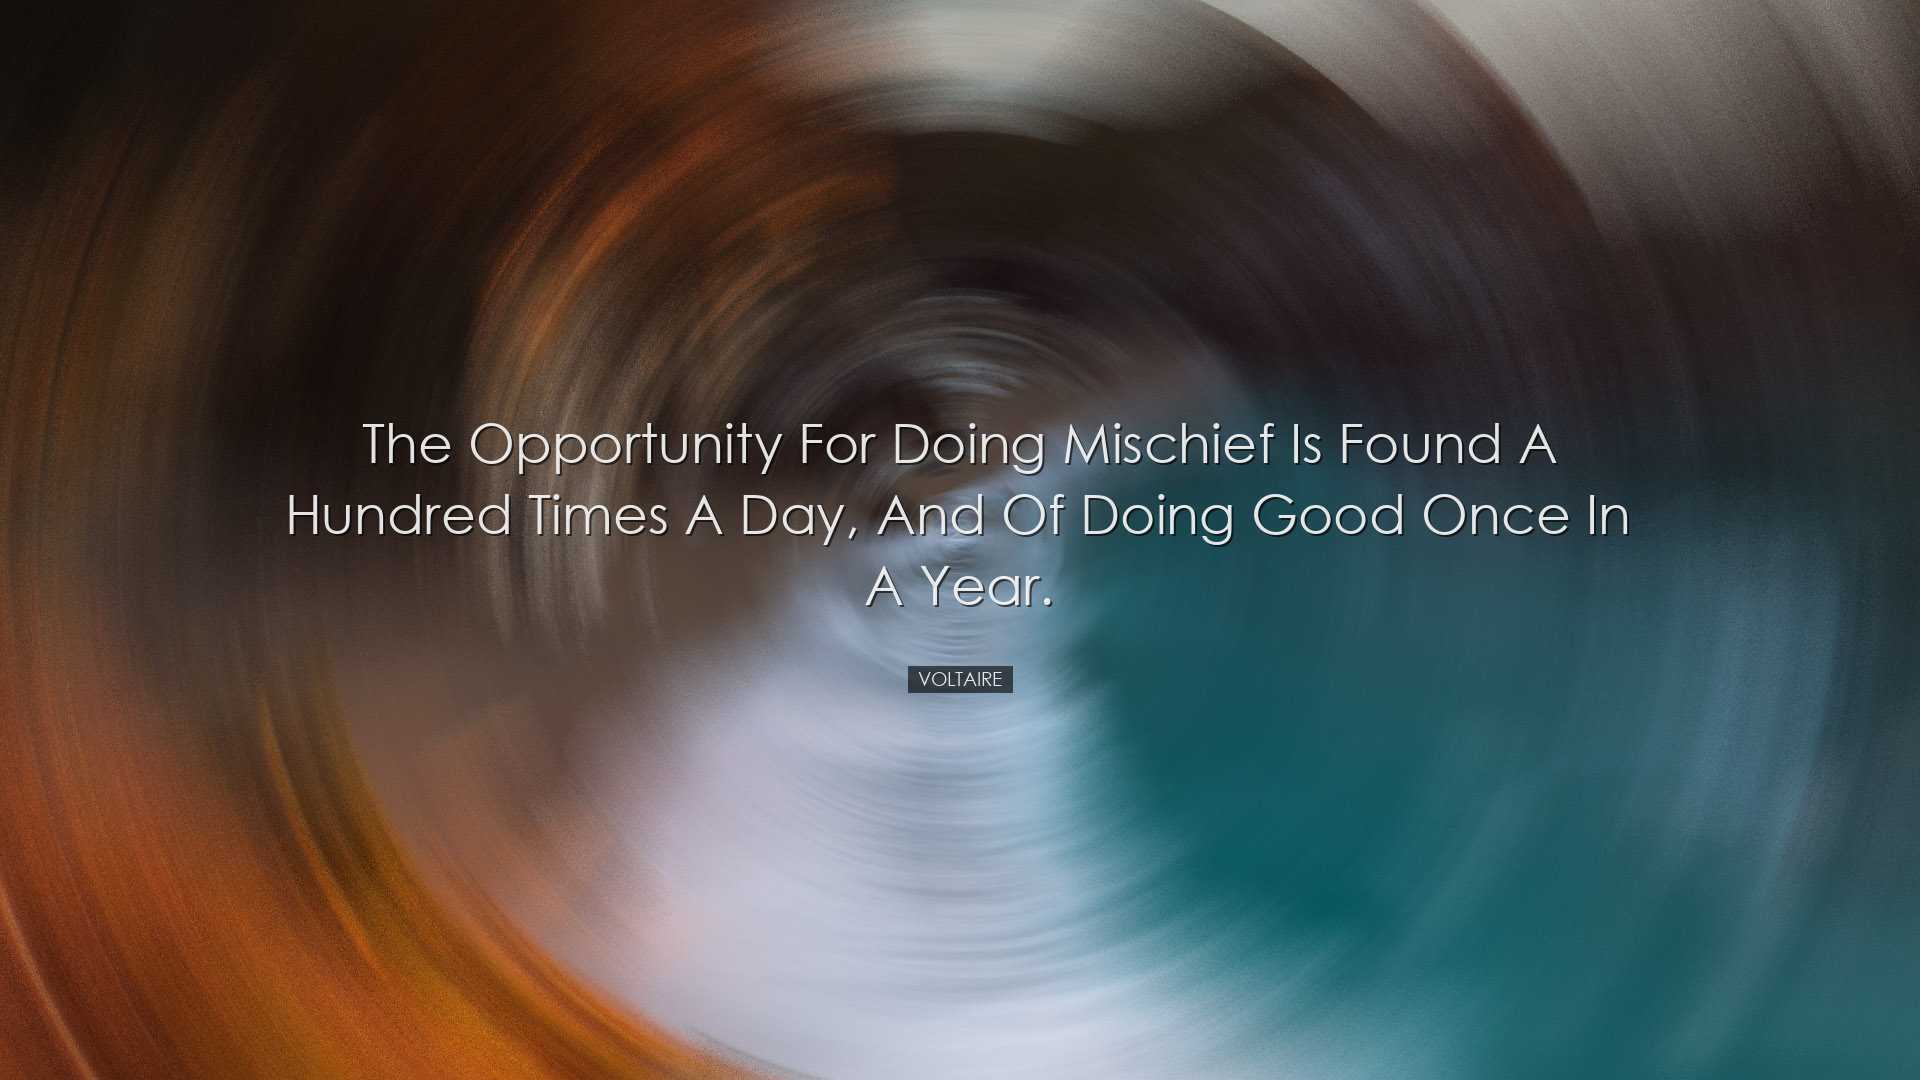 The opportunity for doing mischief is found a hundred times a day,